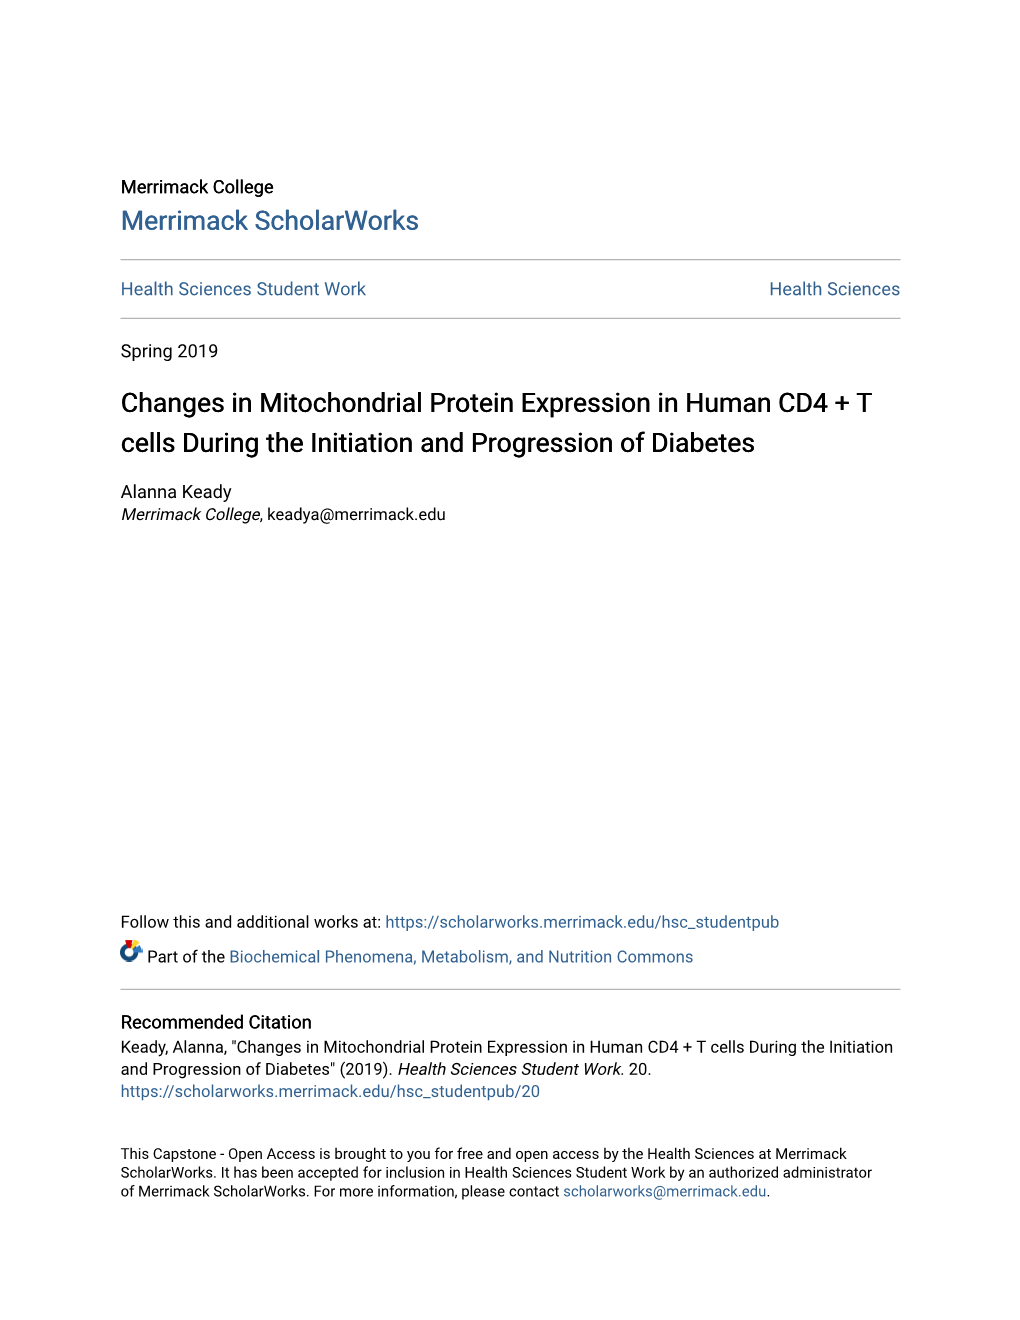 Changes in Mitochondrial Protein Expression in Human CD4 + T Cells During the Initiation and Progression of Diabetes